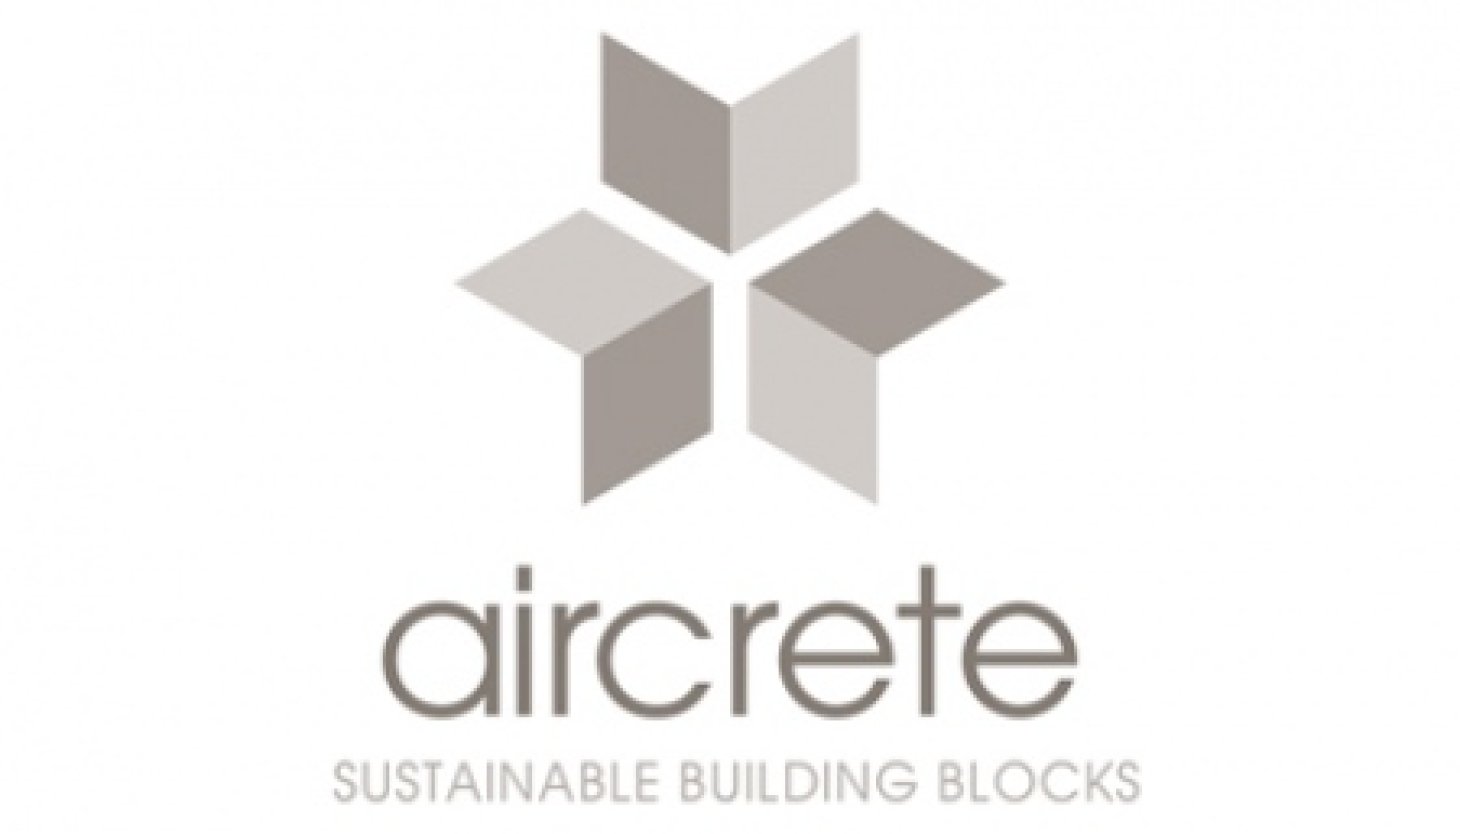 UK Aircrete manufacturing acts on demand for new housing